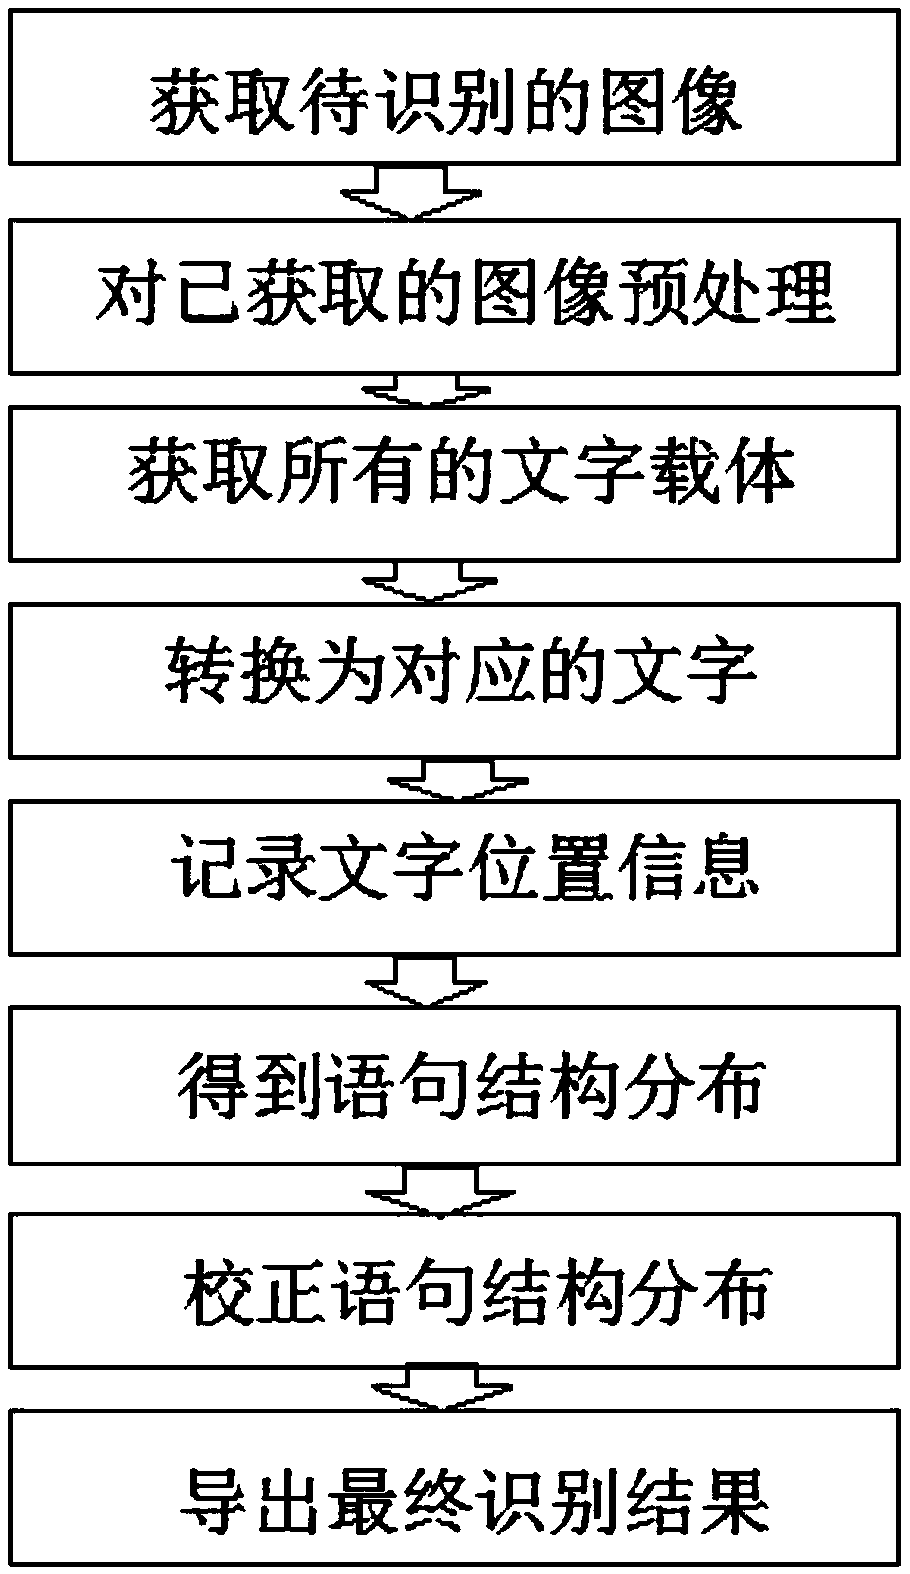 An image-based Chinese character recognition method